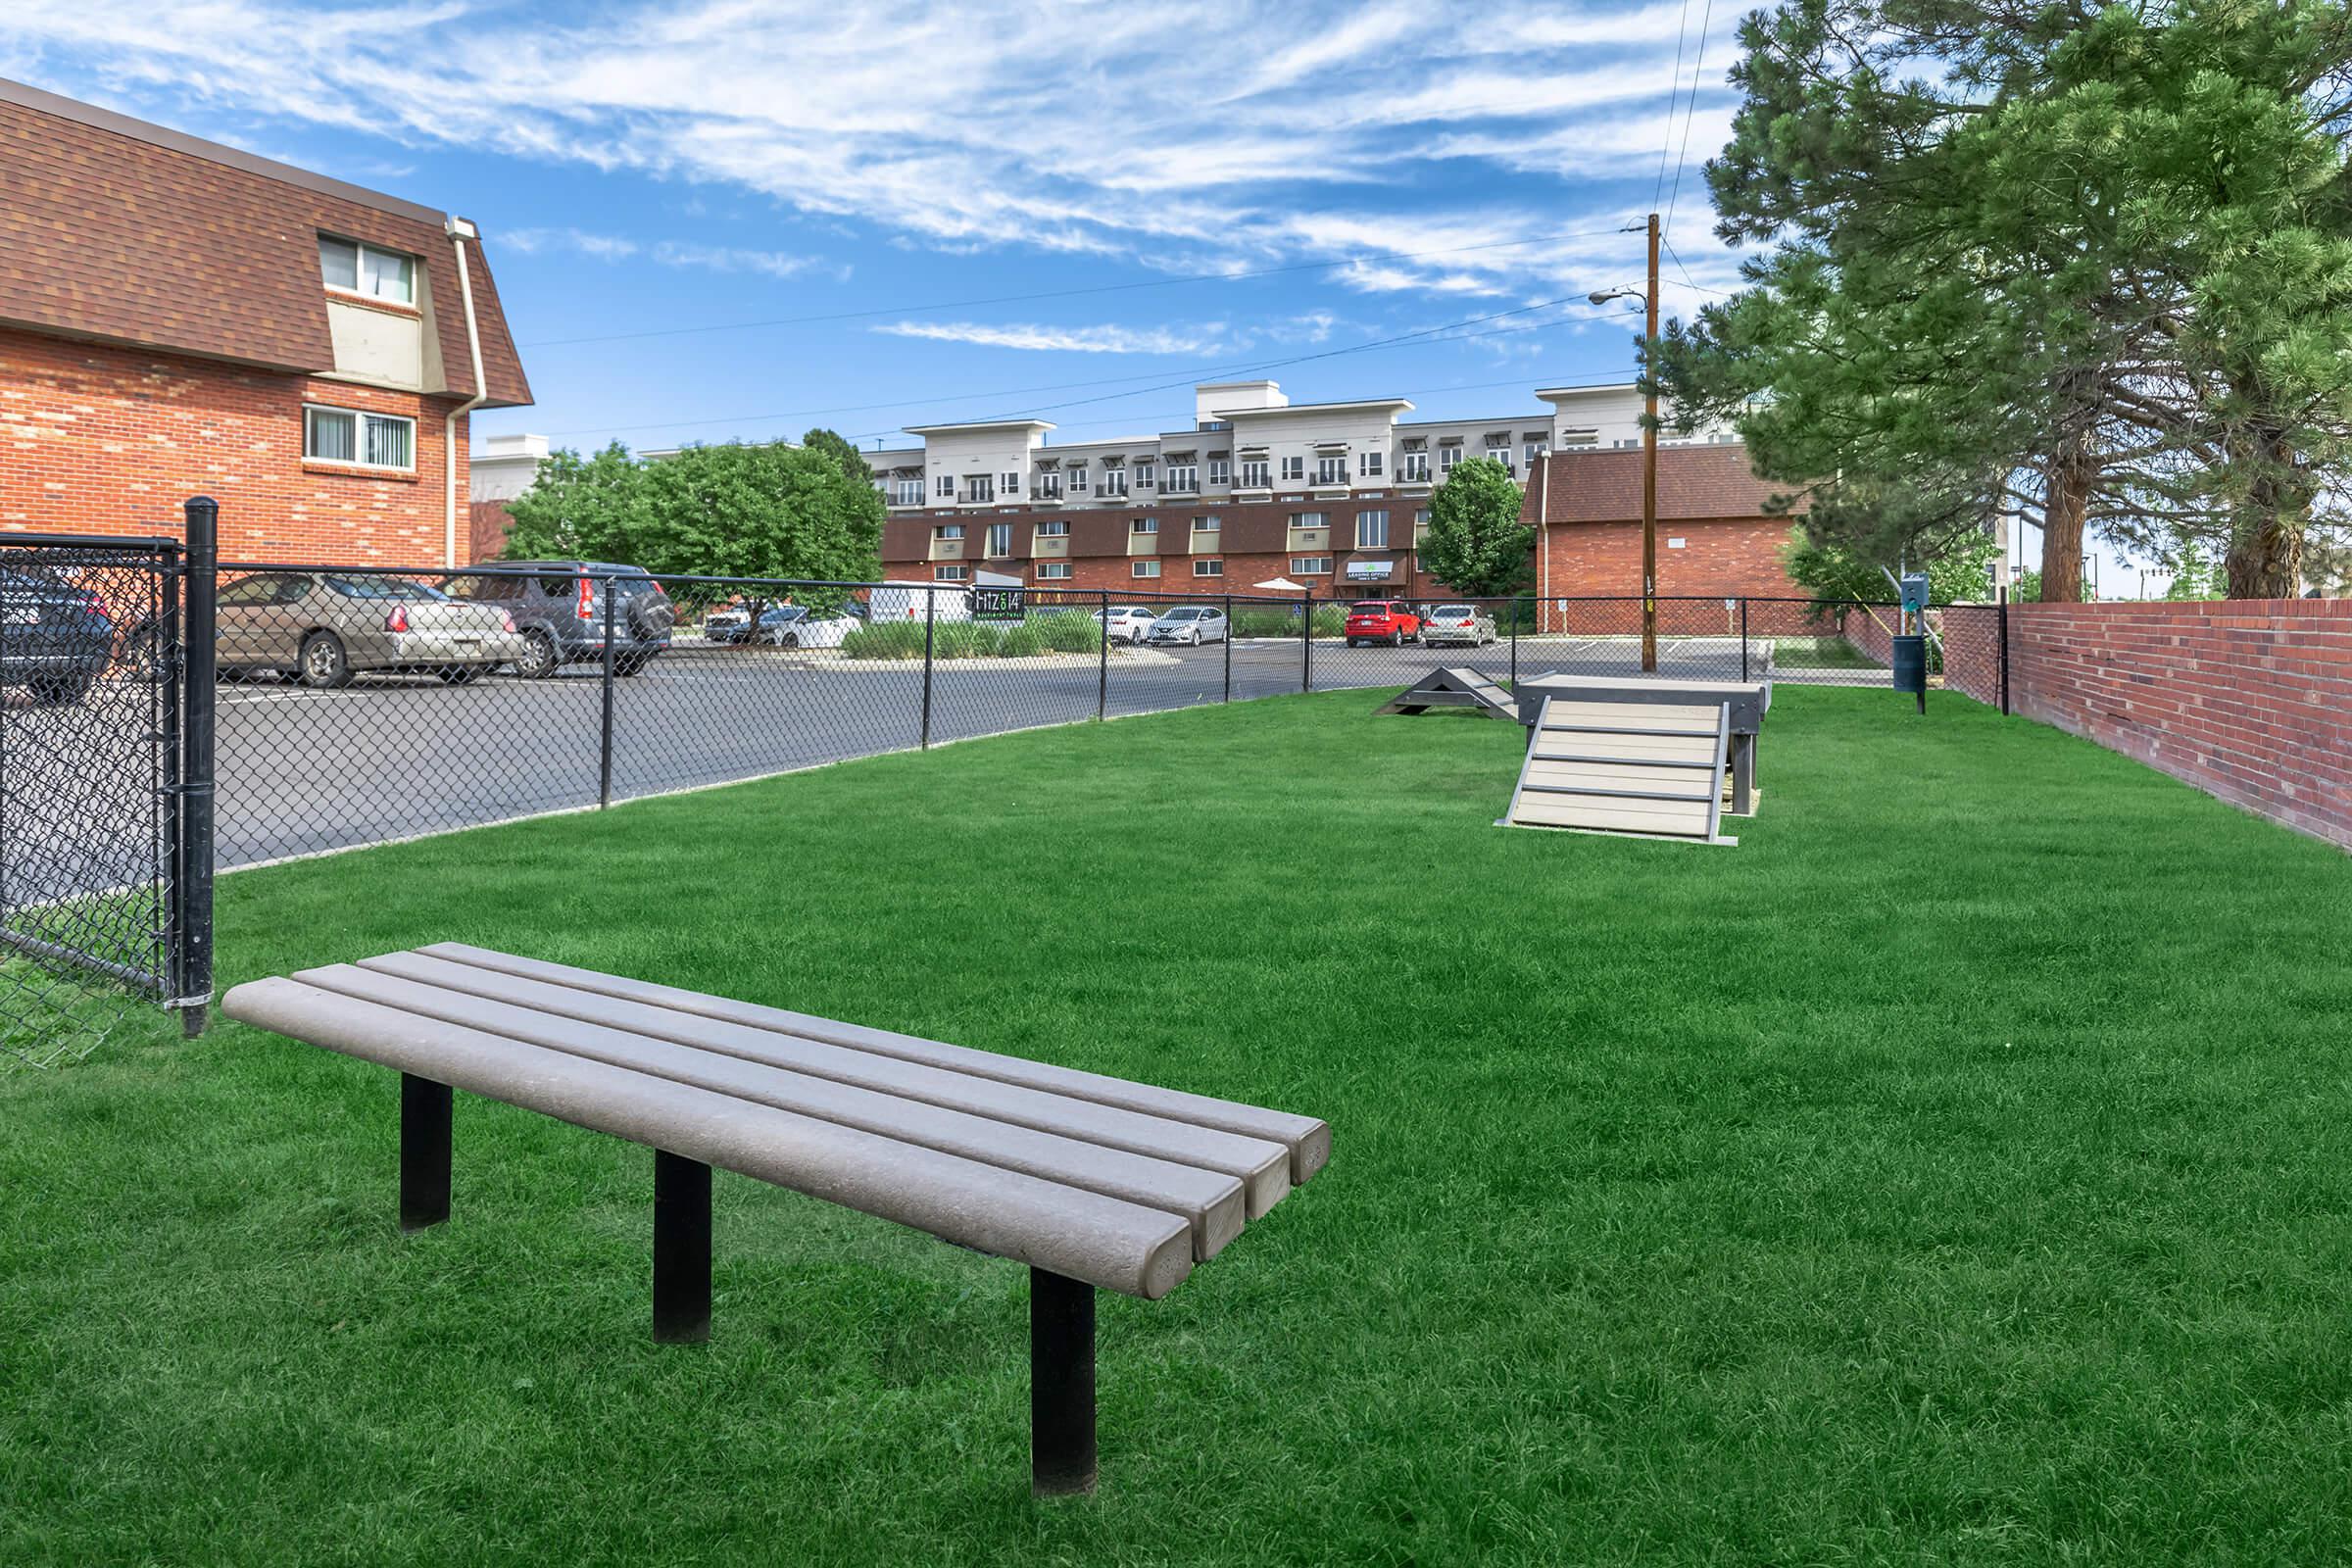 a bench in front of a building